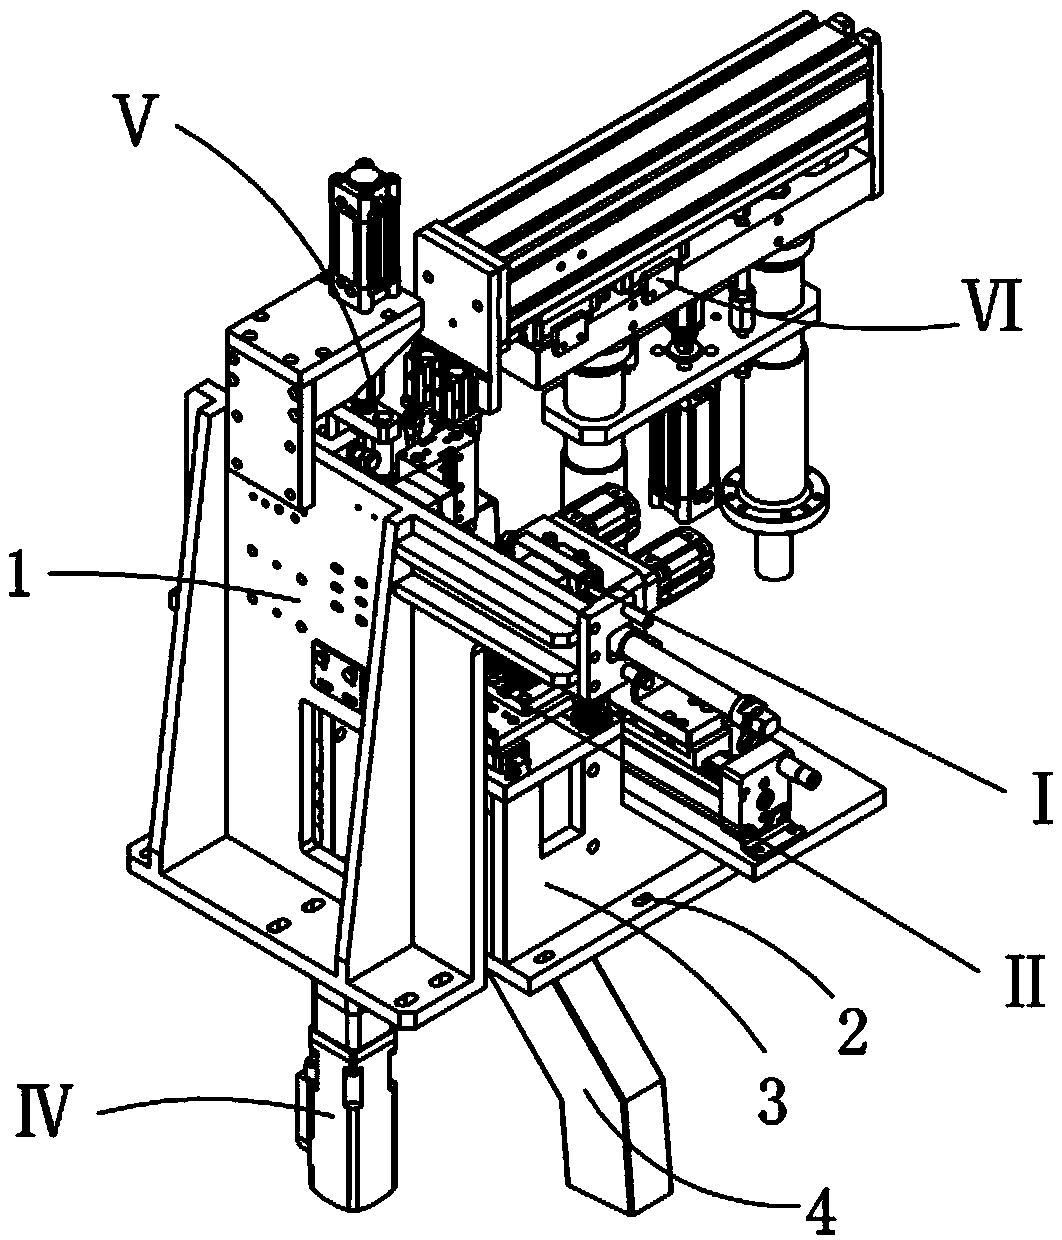 Mechanism for detecting whether product mounting is qualified or not